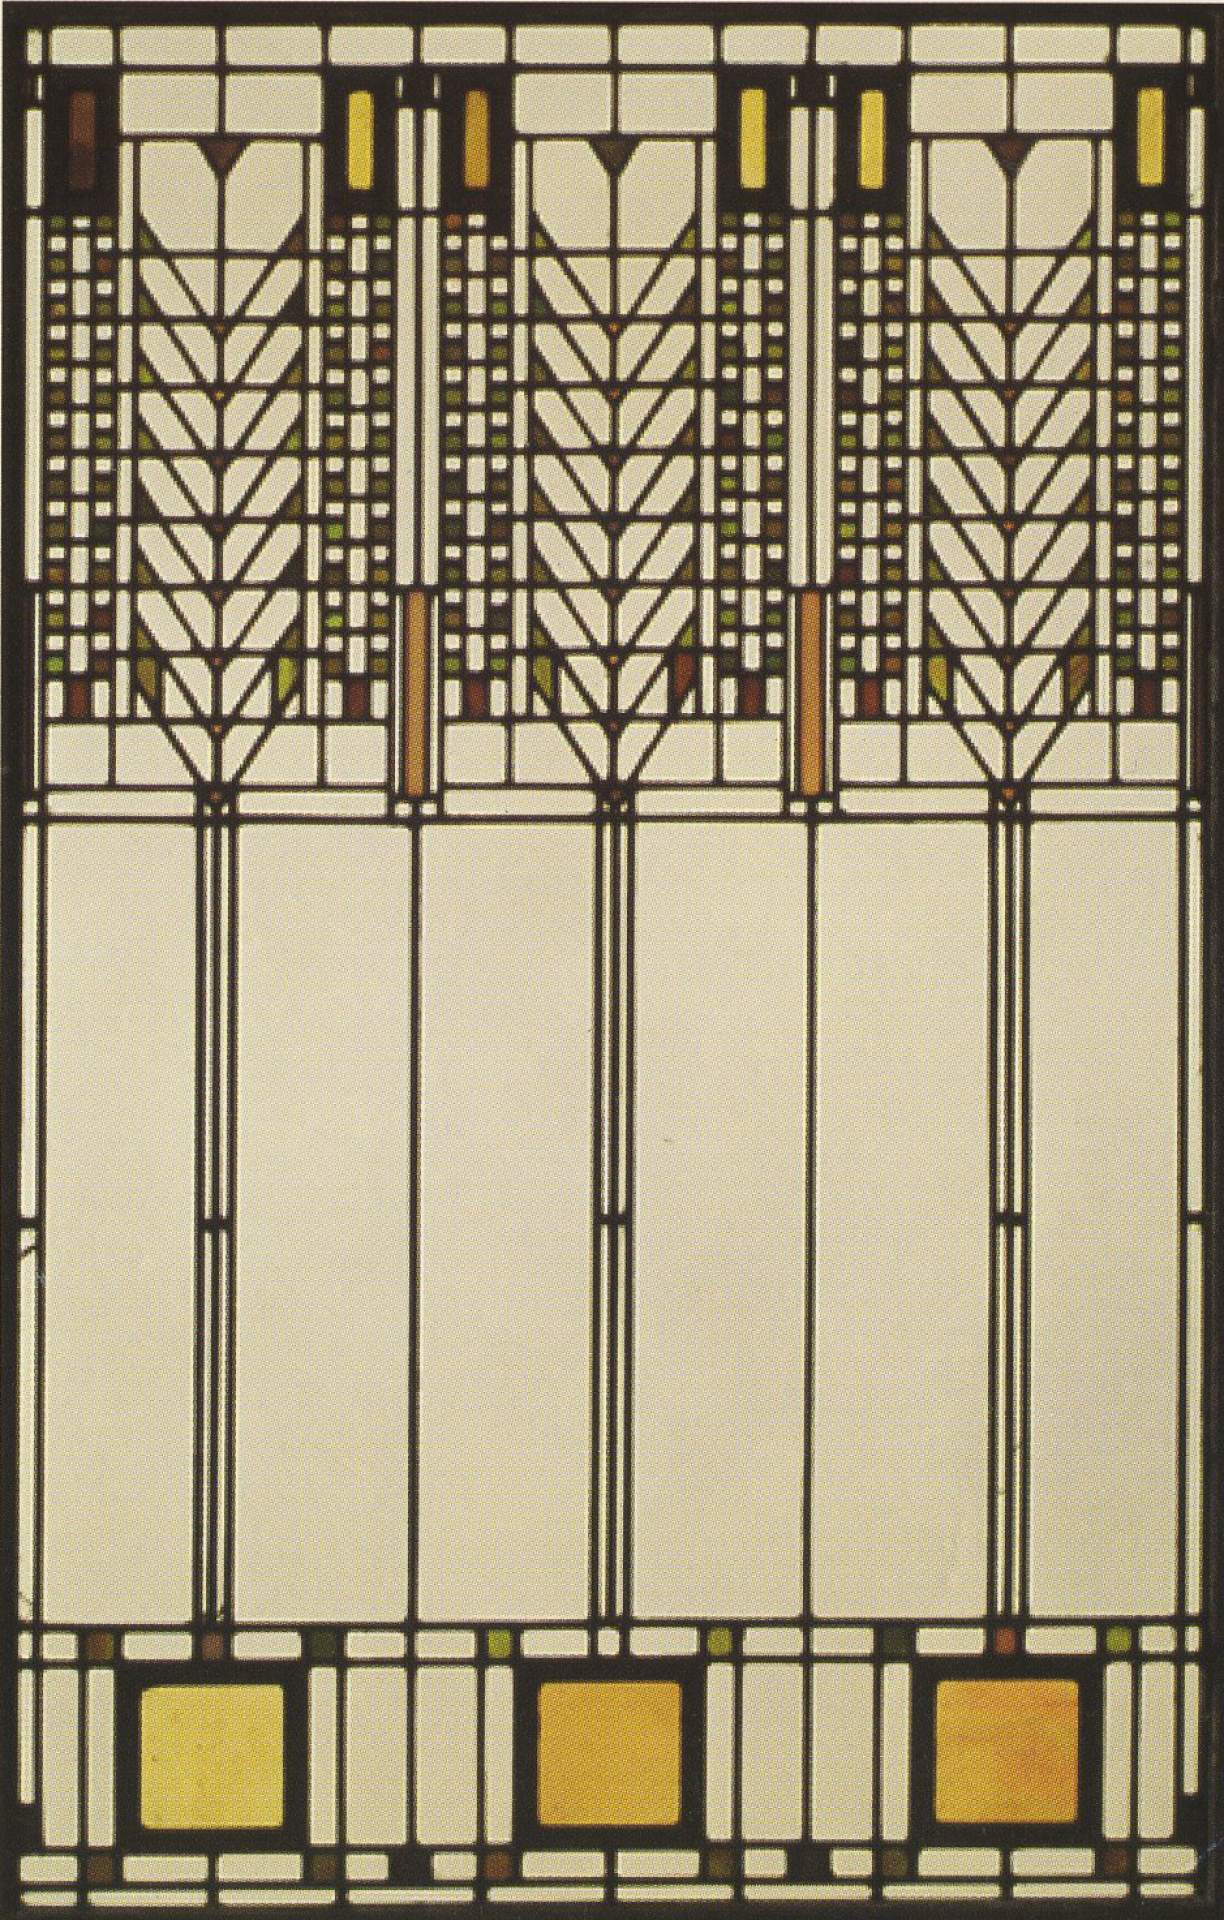 Image of Tree of Life pattern Window, c. 1903-1905, on flyer for Frank Lloyd Wright: Windows from the Darwin D. Martin Complex exhibition